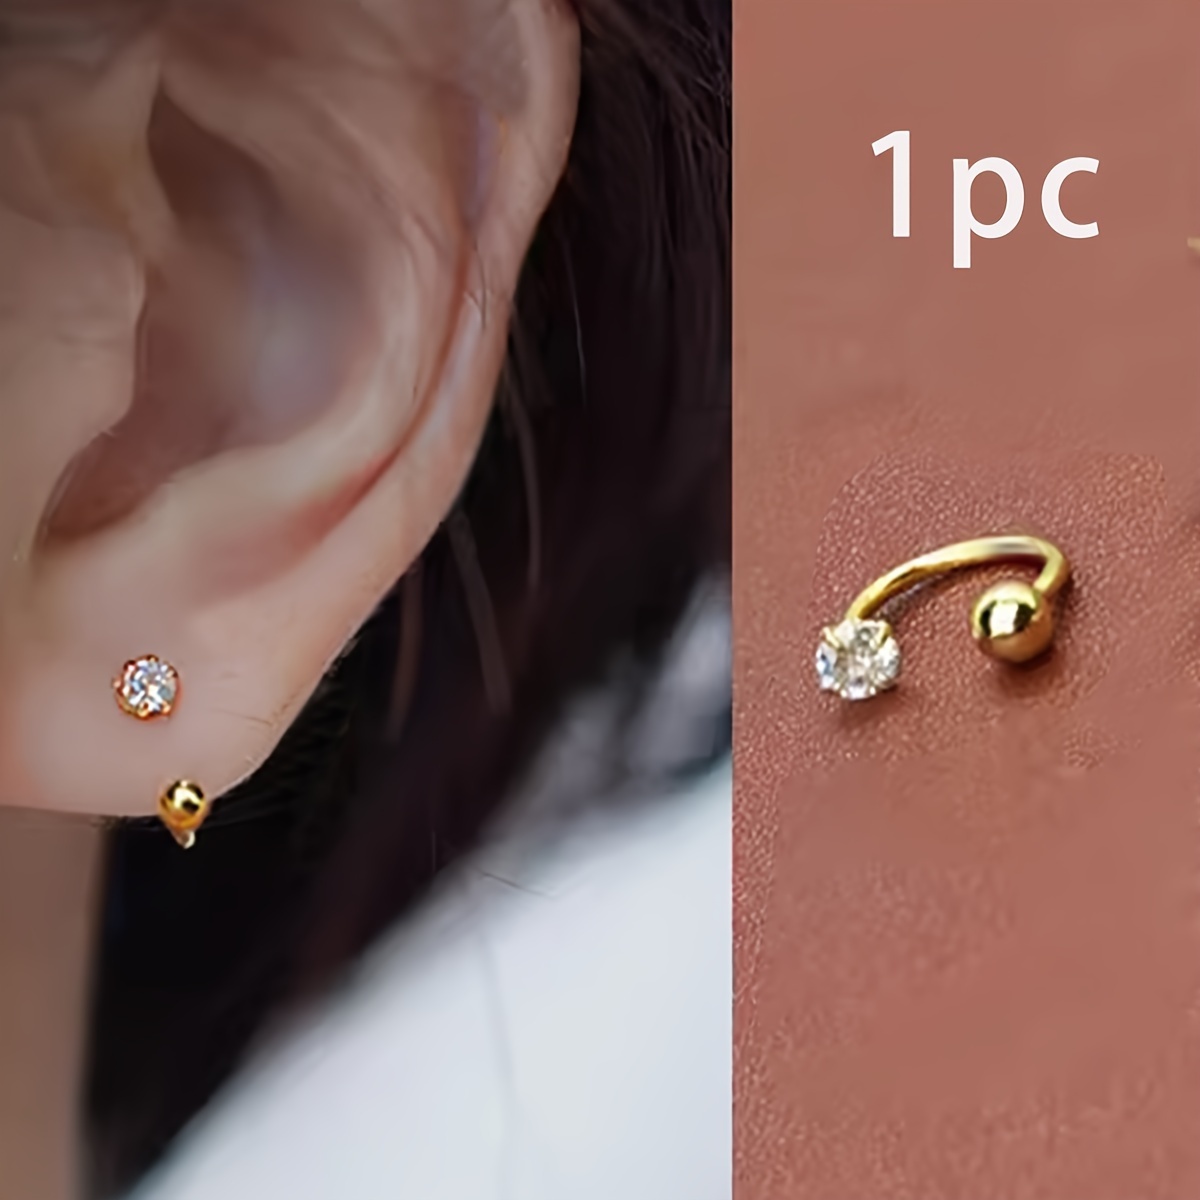 

1pc Elegant & Cute Plated Stainless Steel C-shaped Piercing Stud With Zirconia, Screw-back Helix Earring For Women